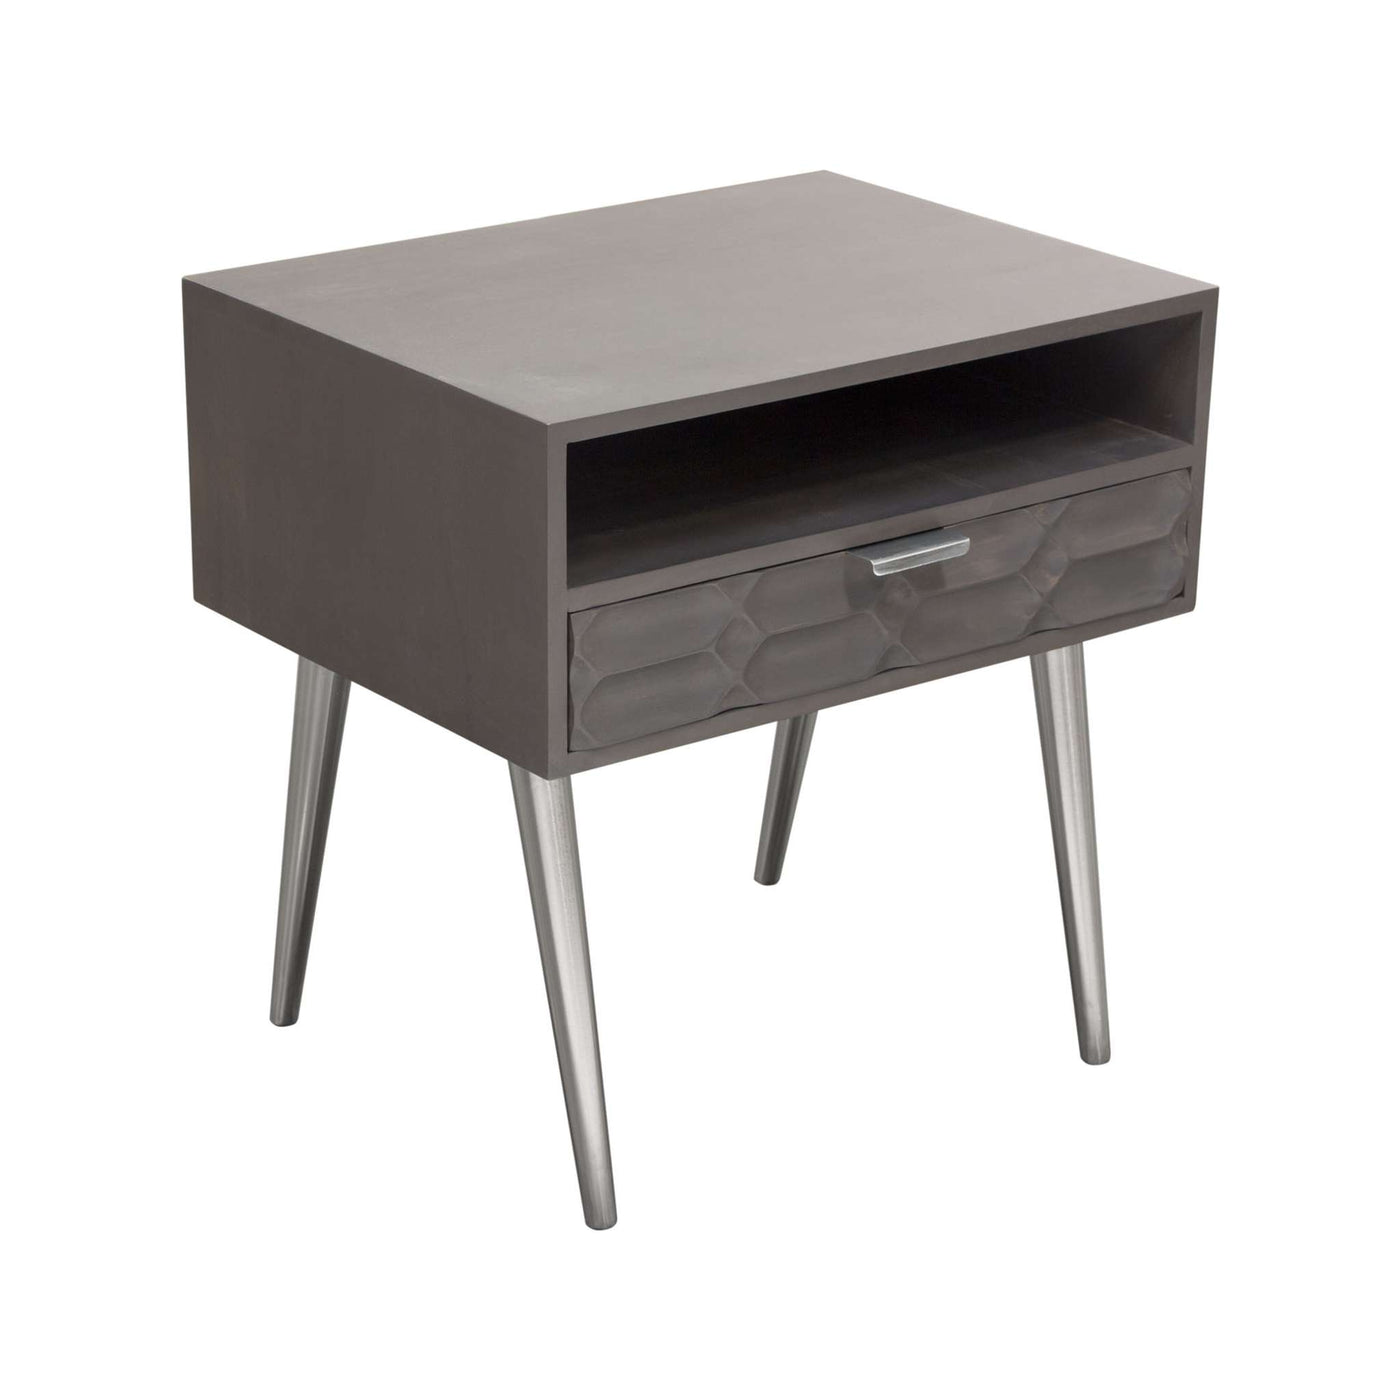 Petra Solid Mango Wood 1-Drawer Accent Table in Smoke Grey Finish w/ Nickel Legs by Diamond Sofa